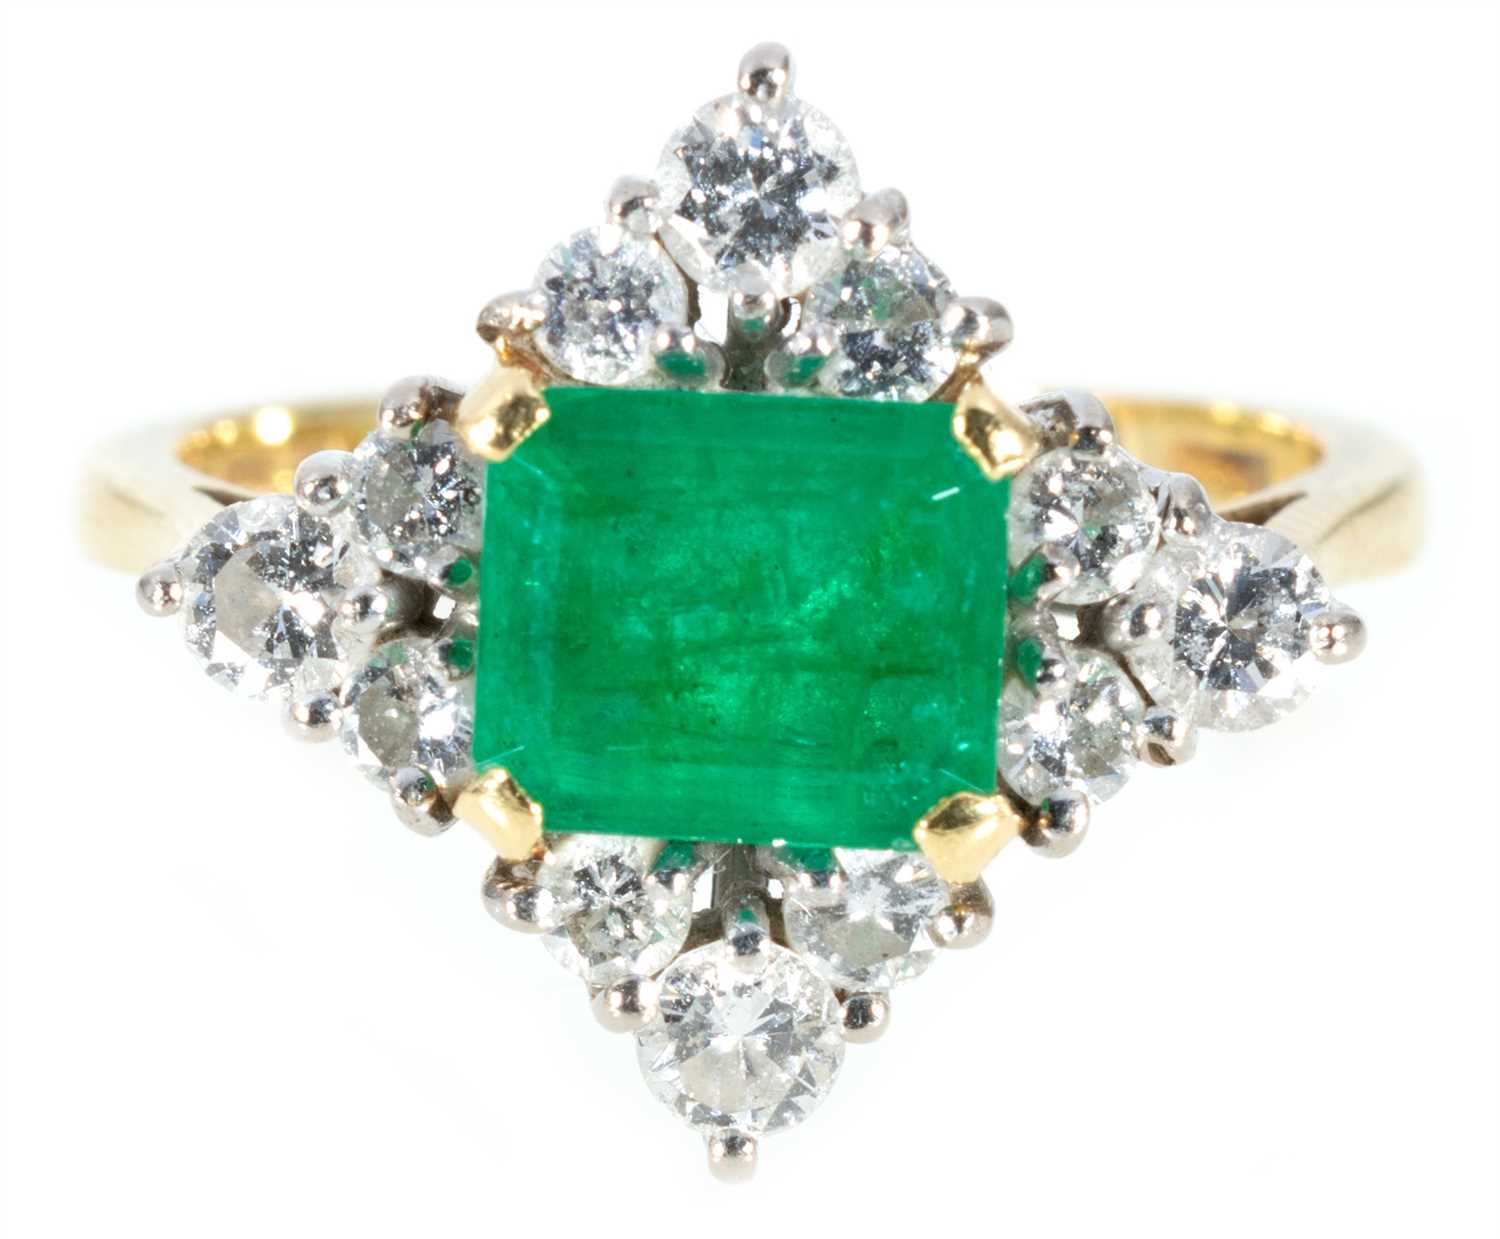 Lot 206 - An emerald and diamond cluster ring.